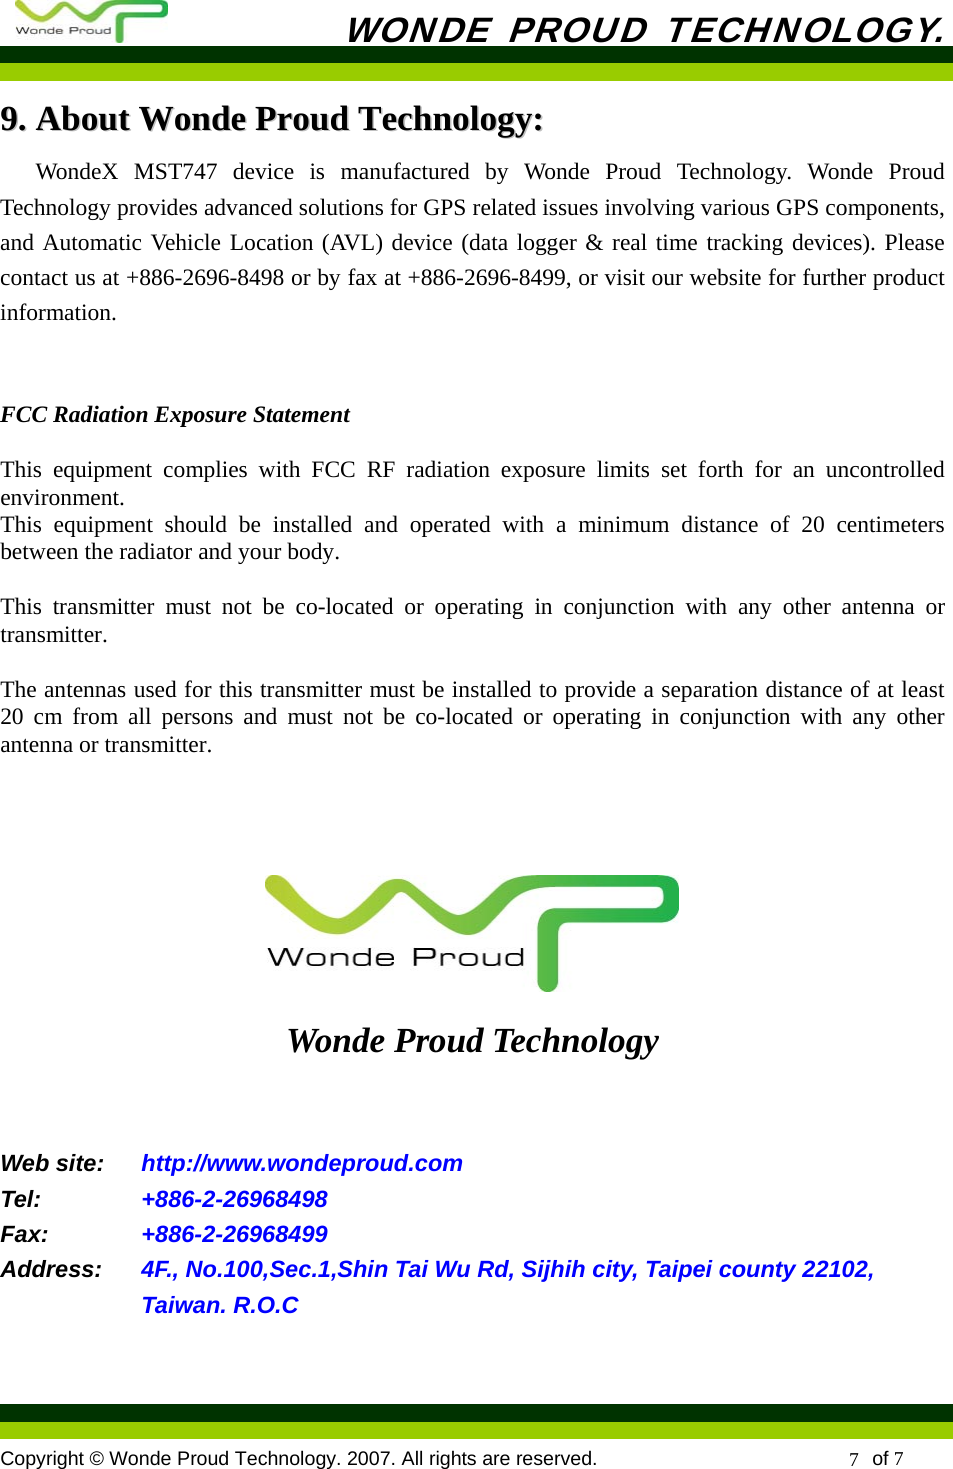           WONDE PROUD TECHNOLOGY.  Copyright © Wonde Proud Technology. 2007. All rights are reserved.                            of 7 7 99..  AAbboouutt  WWoonnddee  PPrroouudd  TTeecchhnnoollooggyy::  WondeX MST747 device is manufactured by Wonde Proud Technology. Wonde Proud Technology provides advanced solutions for GPS related issues involving various GPS components, and Automatic Vehicle Location (AVL) device (data logger &amp; real time tracking devices). Please contact us at +886-2696-8498 or by fax at +886-2696-8499, or visit our website for further product information.   FCC Radiation Exposure Statement  This equipment complies with FCC RF radiation exposure limits set forth for an uncontrolled environment.   This equipment should be installed and operated with a minimum distance of 20 centimeters between the radiator and your body.  This transmitter must not be co-located or operating in conjunction with any other antenna or transmitter.  The antennas used for this transmitter must be installed to provide a separation distance of at least 20 cm from all persons and must not be co-located or operating in conjunction with any other antenna or transmitter.     Wonde Proud Technology  Web site:    http://www.wondeproud.com Tel:     +886-2-26968498 Fax:  +886-2-26968499 Address:   4F., No.100,Sec.1,Shin Tai Wu Rd, Sijhih city, Taipei county 22102, Taiwan. R.O.C  